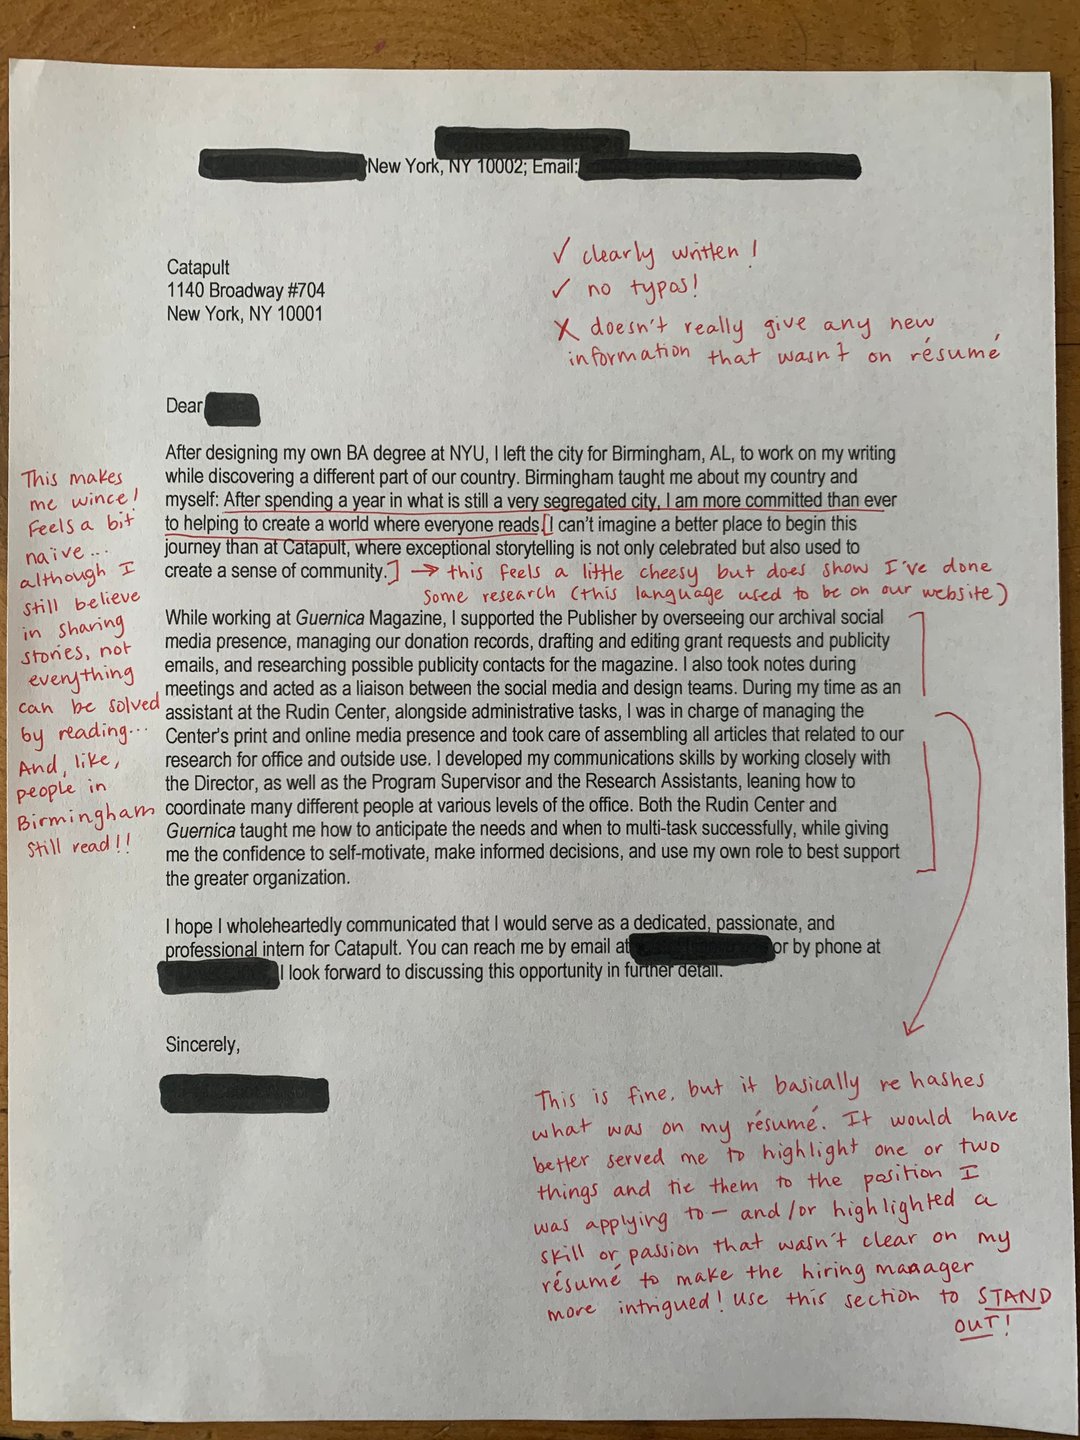 This cover letter was written by someone applying to an internship position at Catapult. Some of the takeaways left in red annotations are that the letter is clearly written, without typos, but that it doesn't really provide any new information that wasn't on the author's resume already.